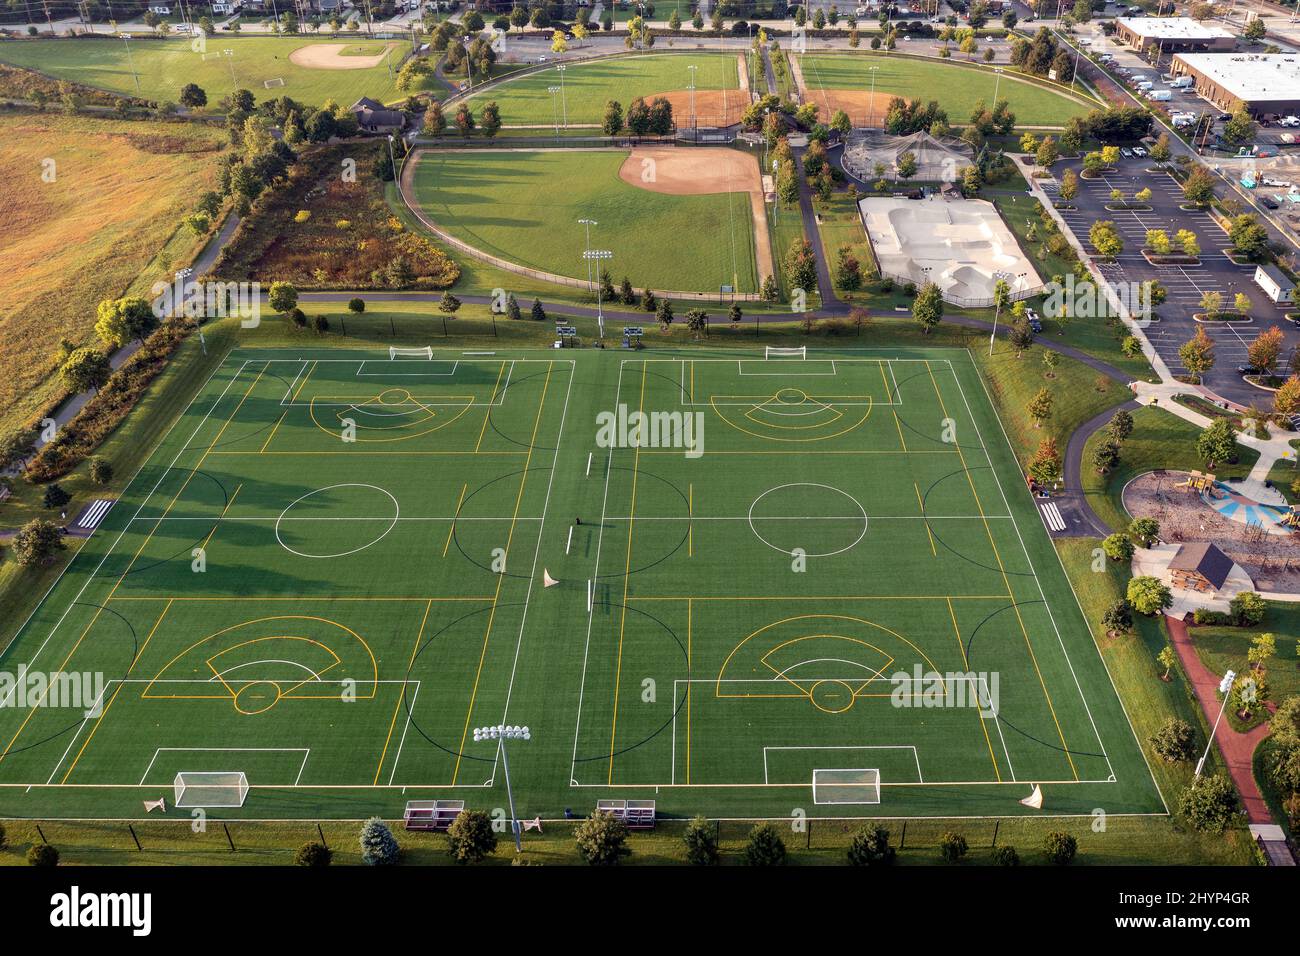 Aerial view of a sports complex with baseball/softball diamonds, artificial turf soccer and lacrosse field, a skate park and batting cages. Stock Photo